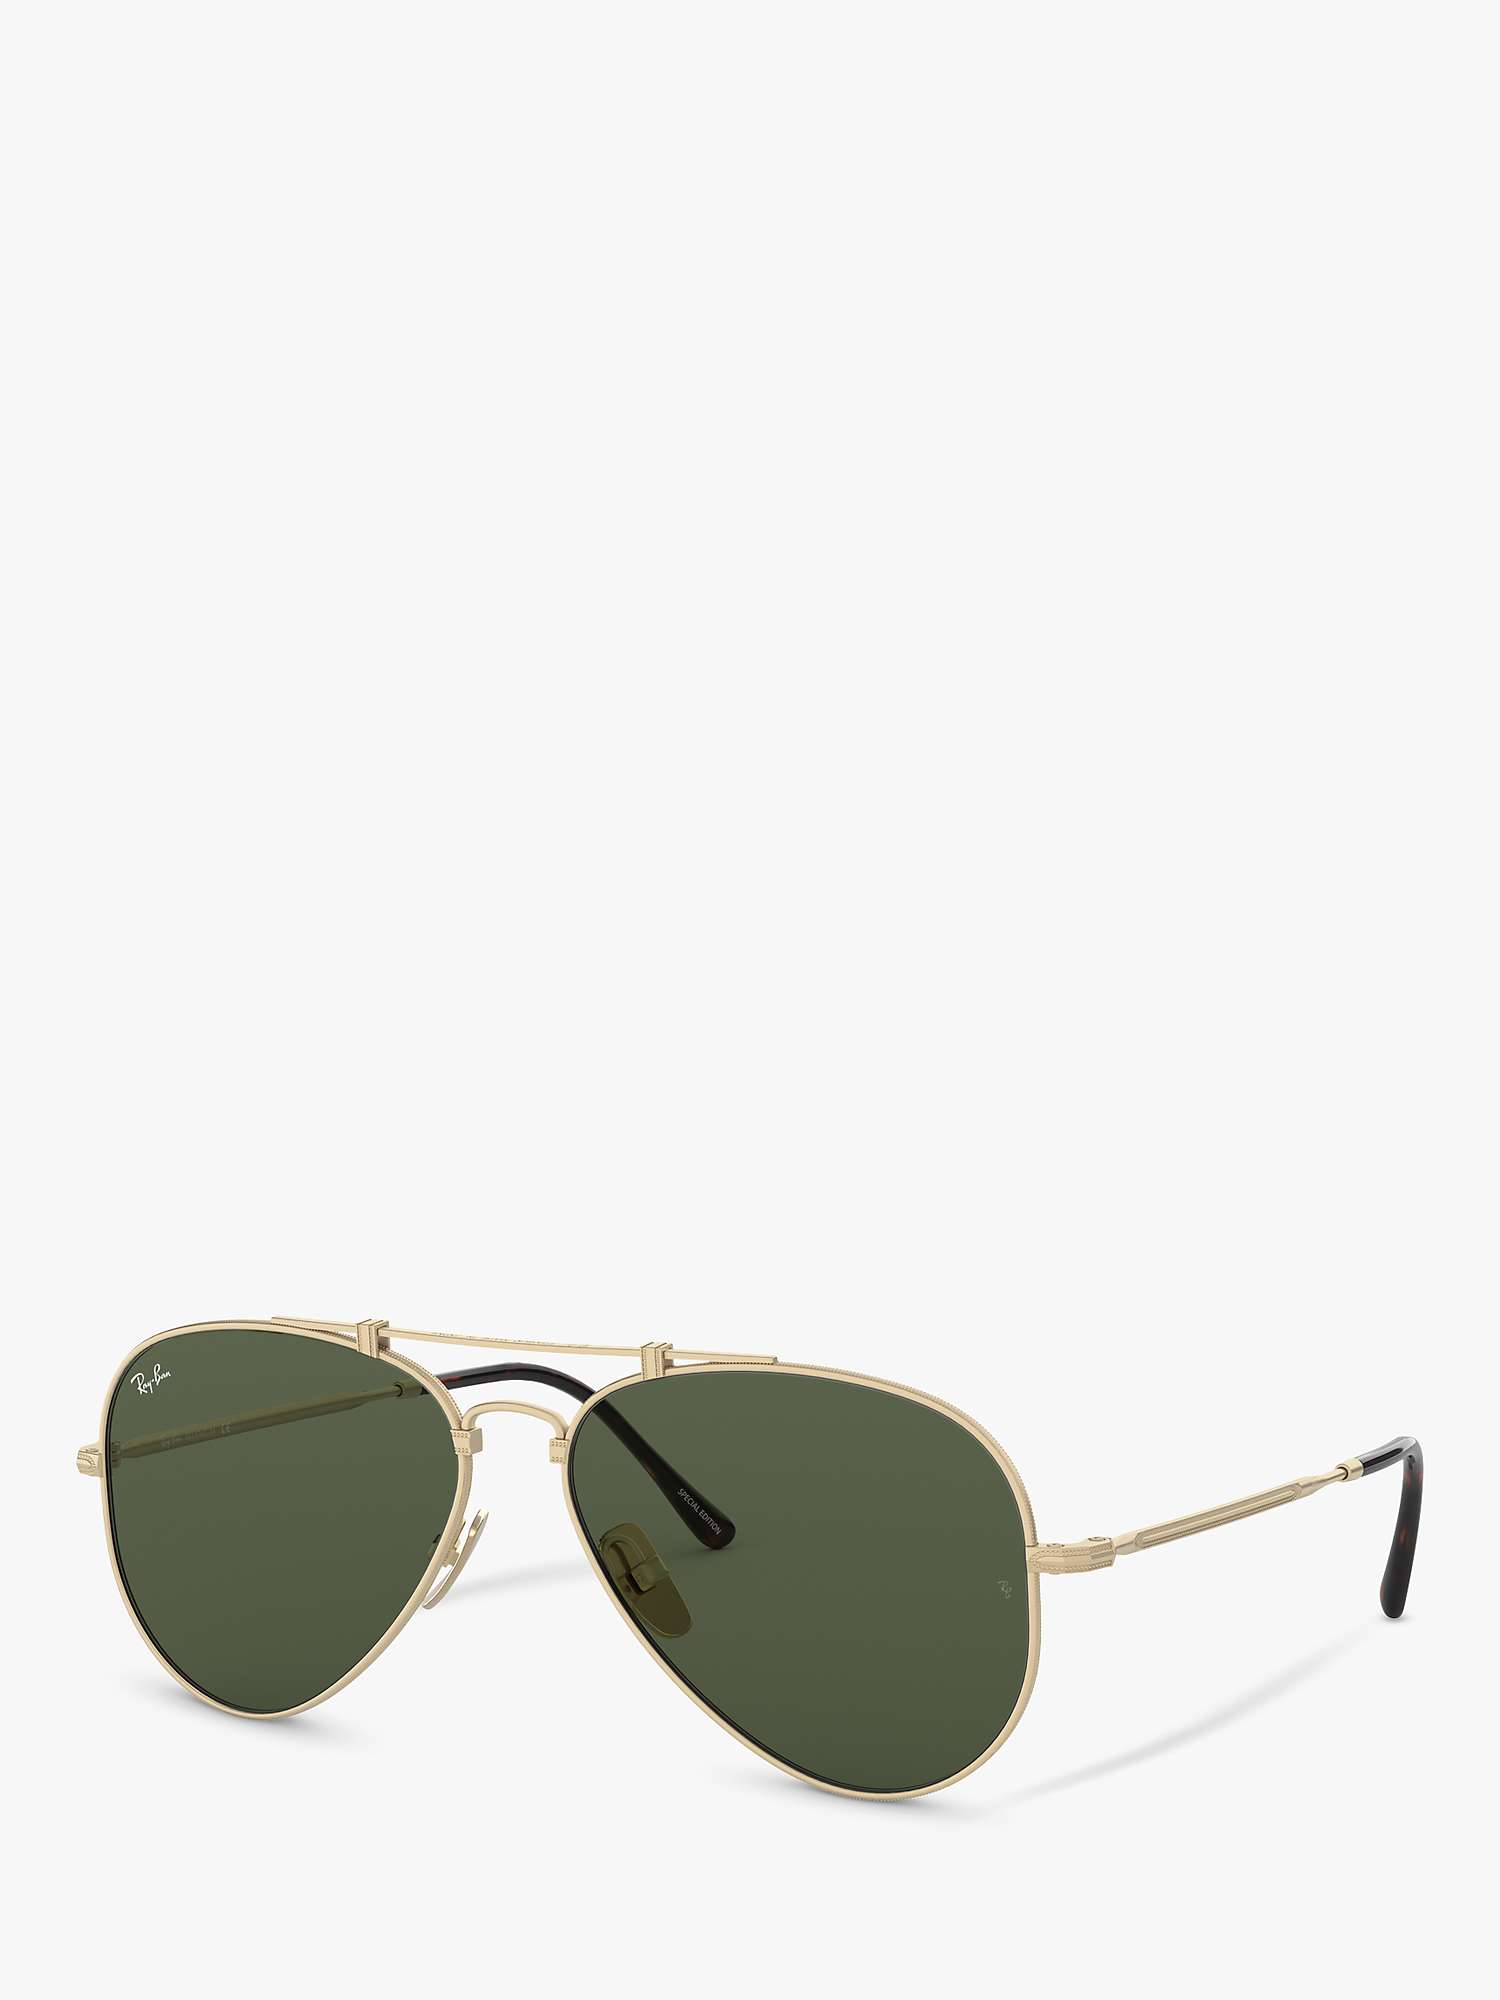 Buy Ray-Ban RB8125 Unisex Aviator Sunglasses, Gold/Green Online at johnlewis.com